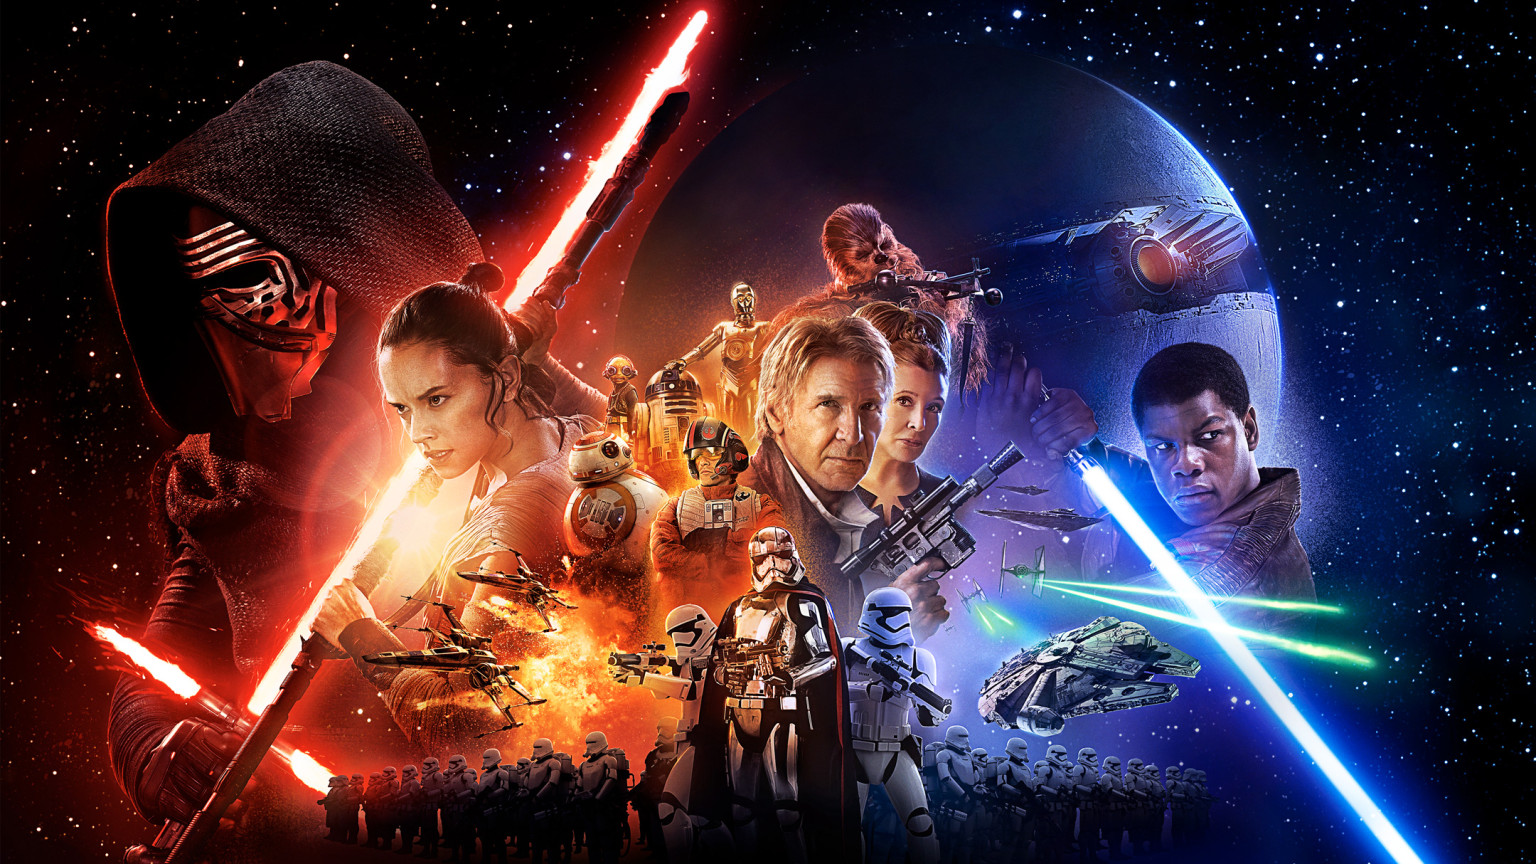 Star Wars The Force Awakens Theatrical Poster First Look In